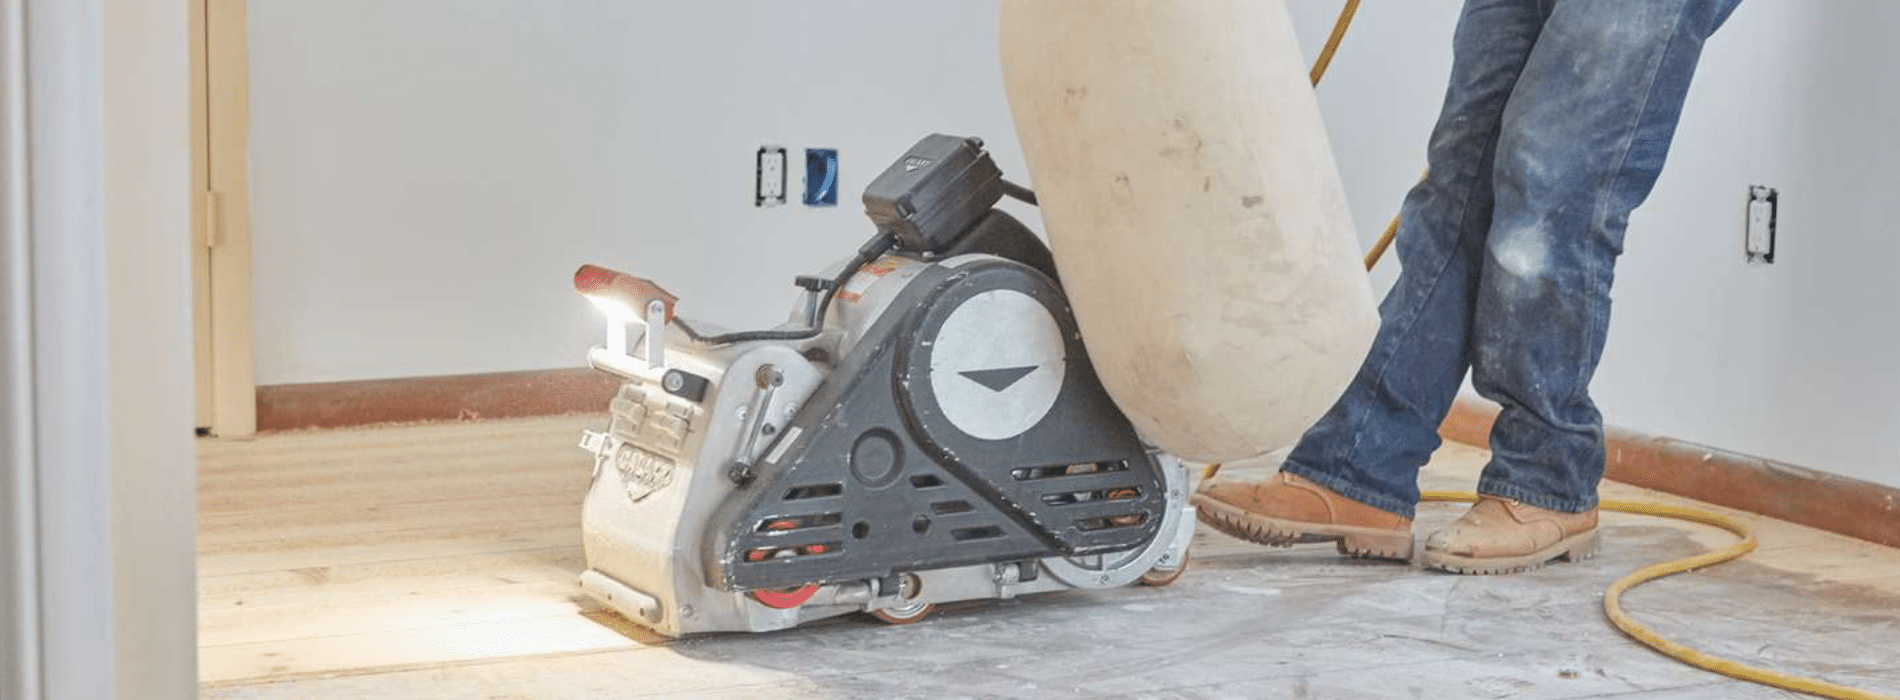 Mr Sander® utilising a 2.2kW, 220V Bona belt sander on a parquet floor in Bow, E3. The HEPA-filtered dust extraction system ensures a clean, efficient sanding process, showcasing the team's commitment to providing superior floor restoration results.